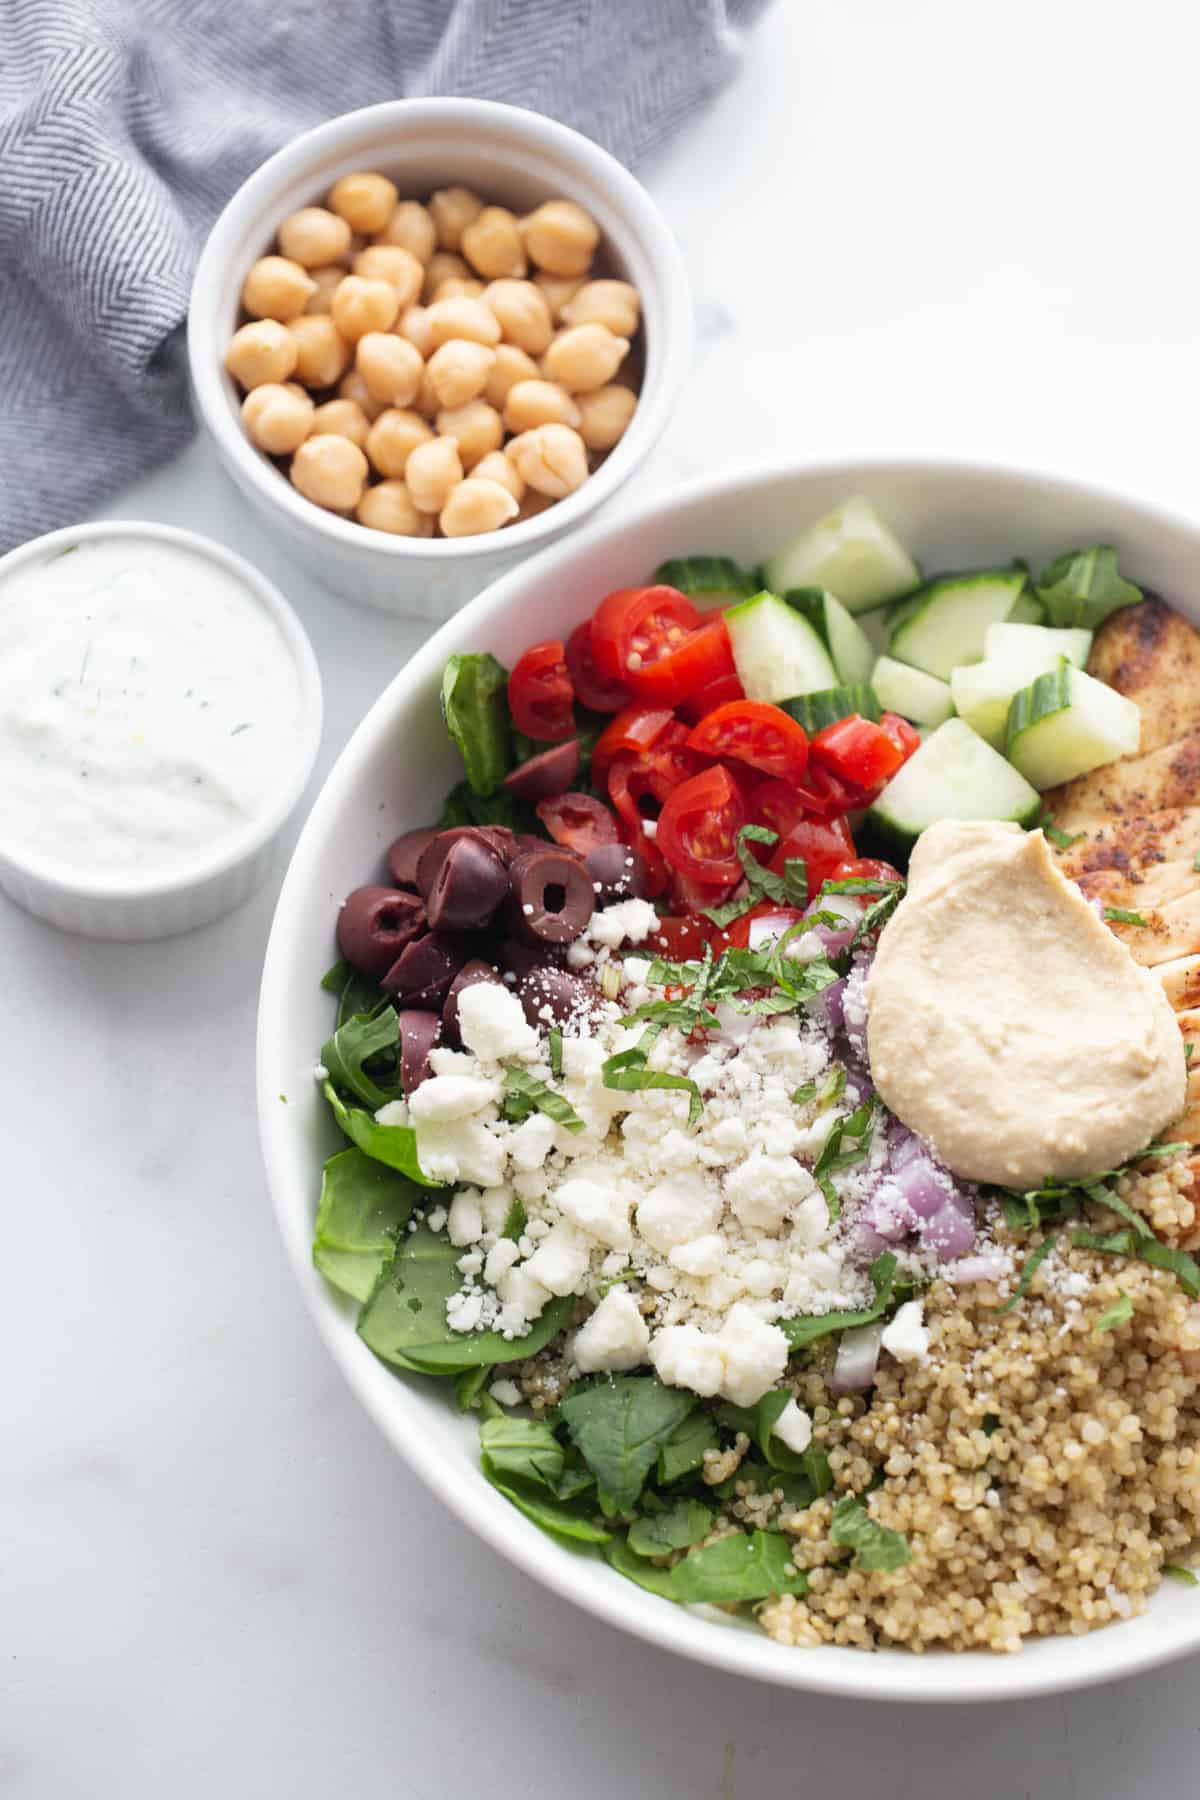 Mediterranean bowls with chicken and quinoa; tzatziki sauce and chickpeas are sitting next to the bowl.